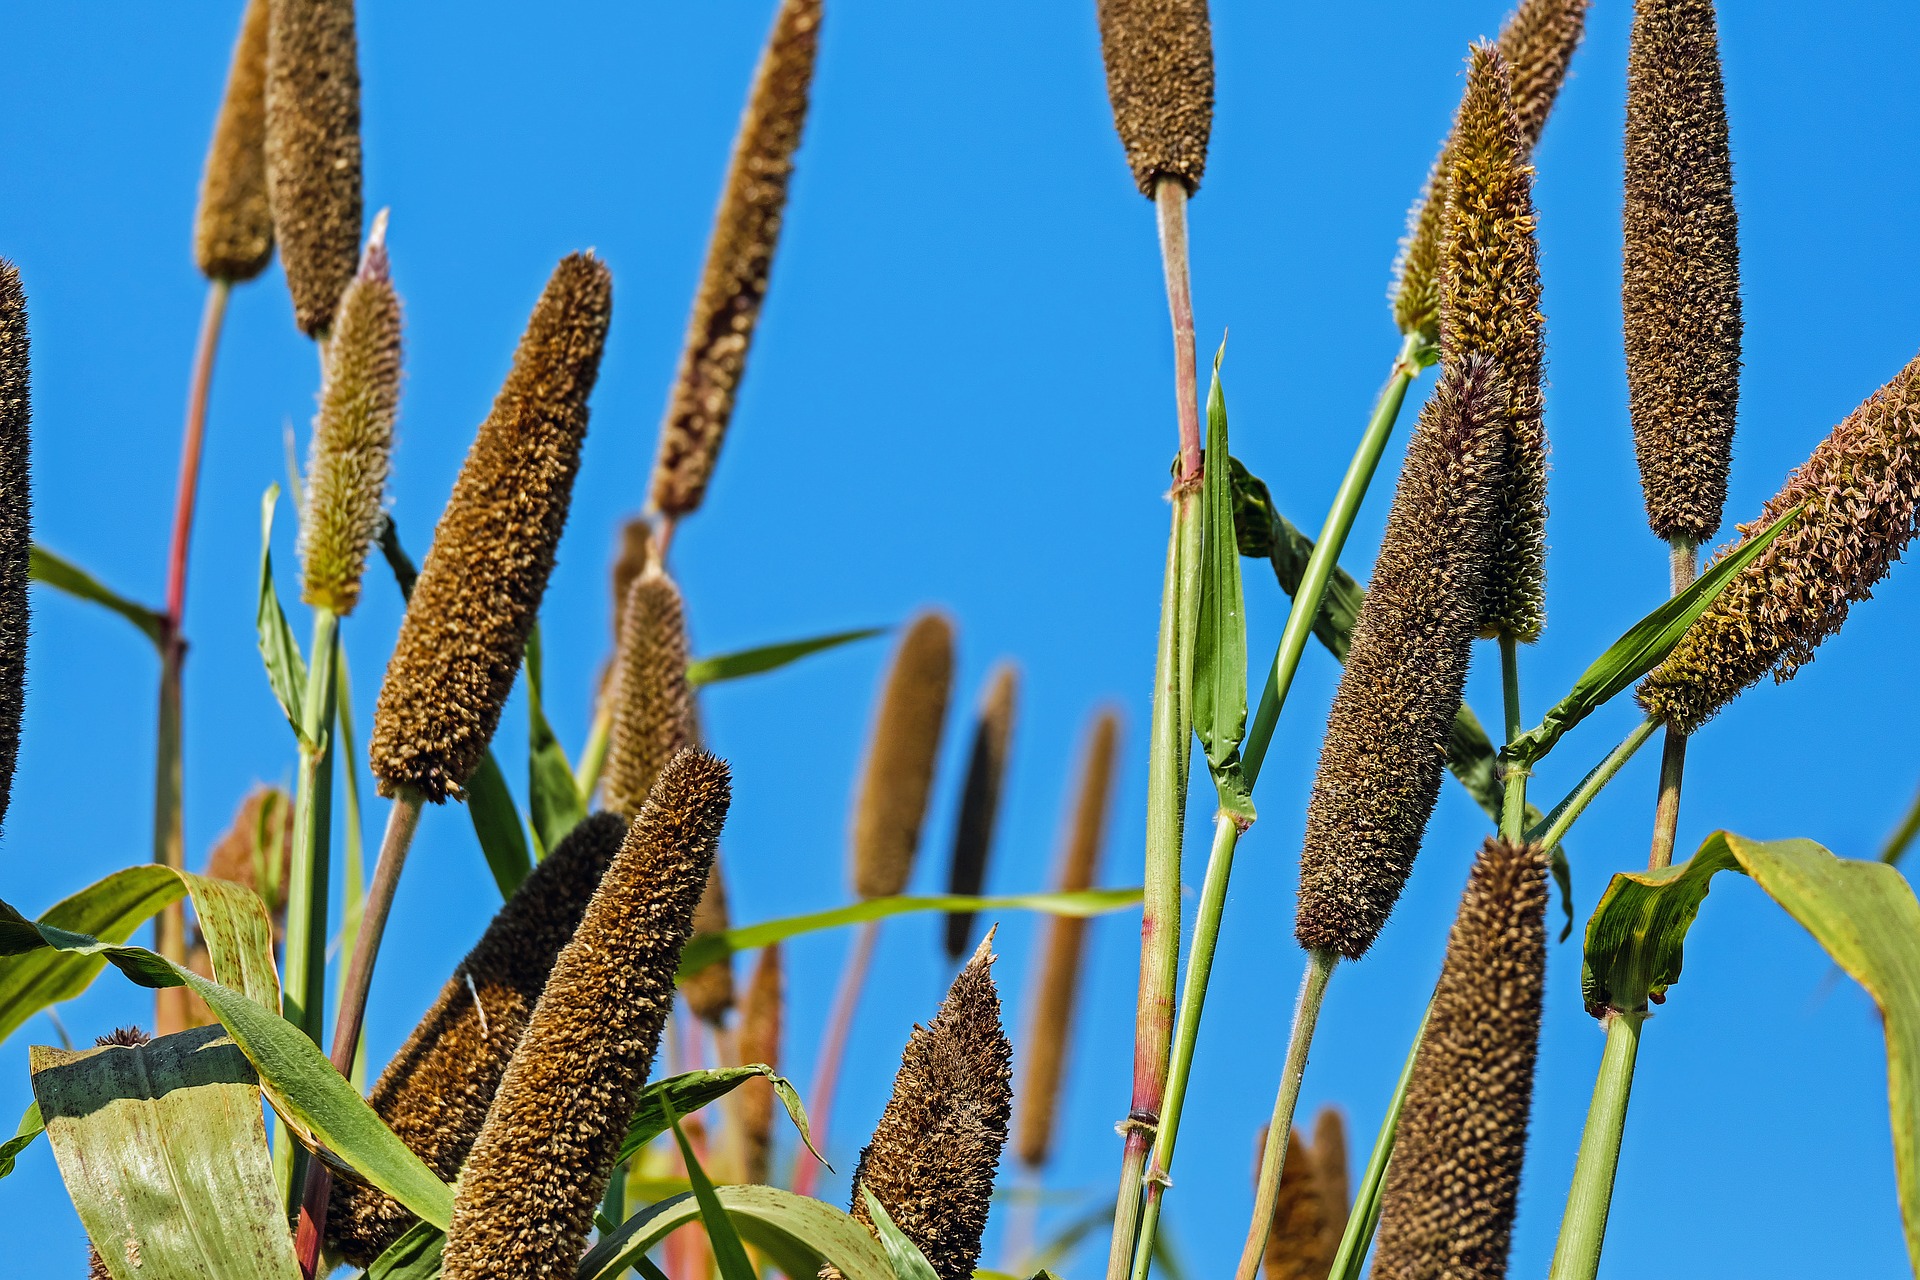 Millets, which the UN and FAO are celebrating for the International Year of Millets 2023